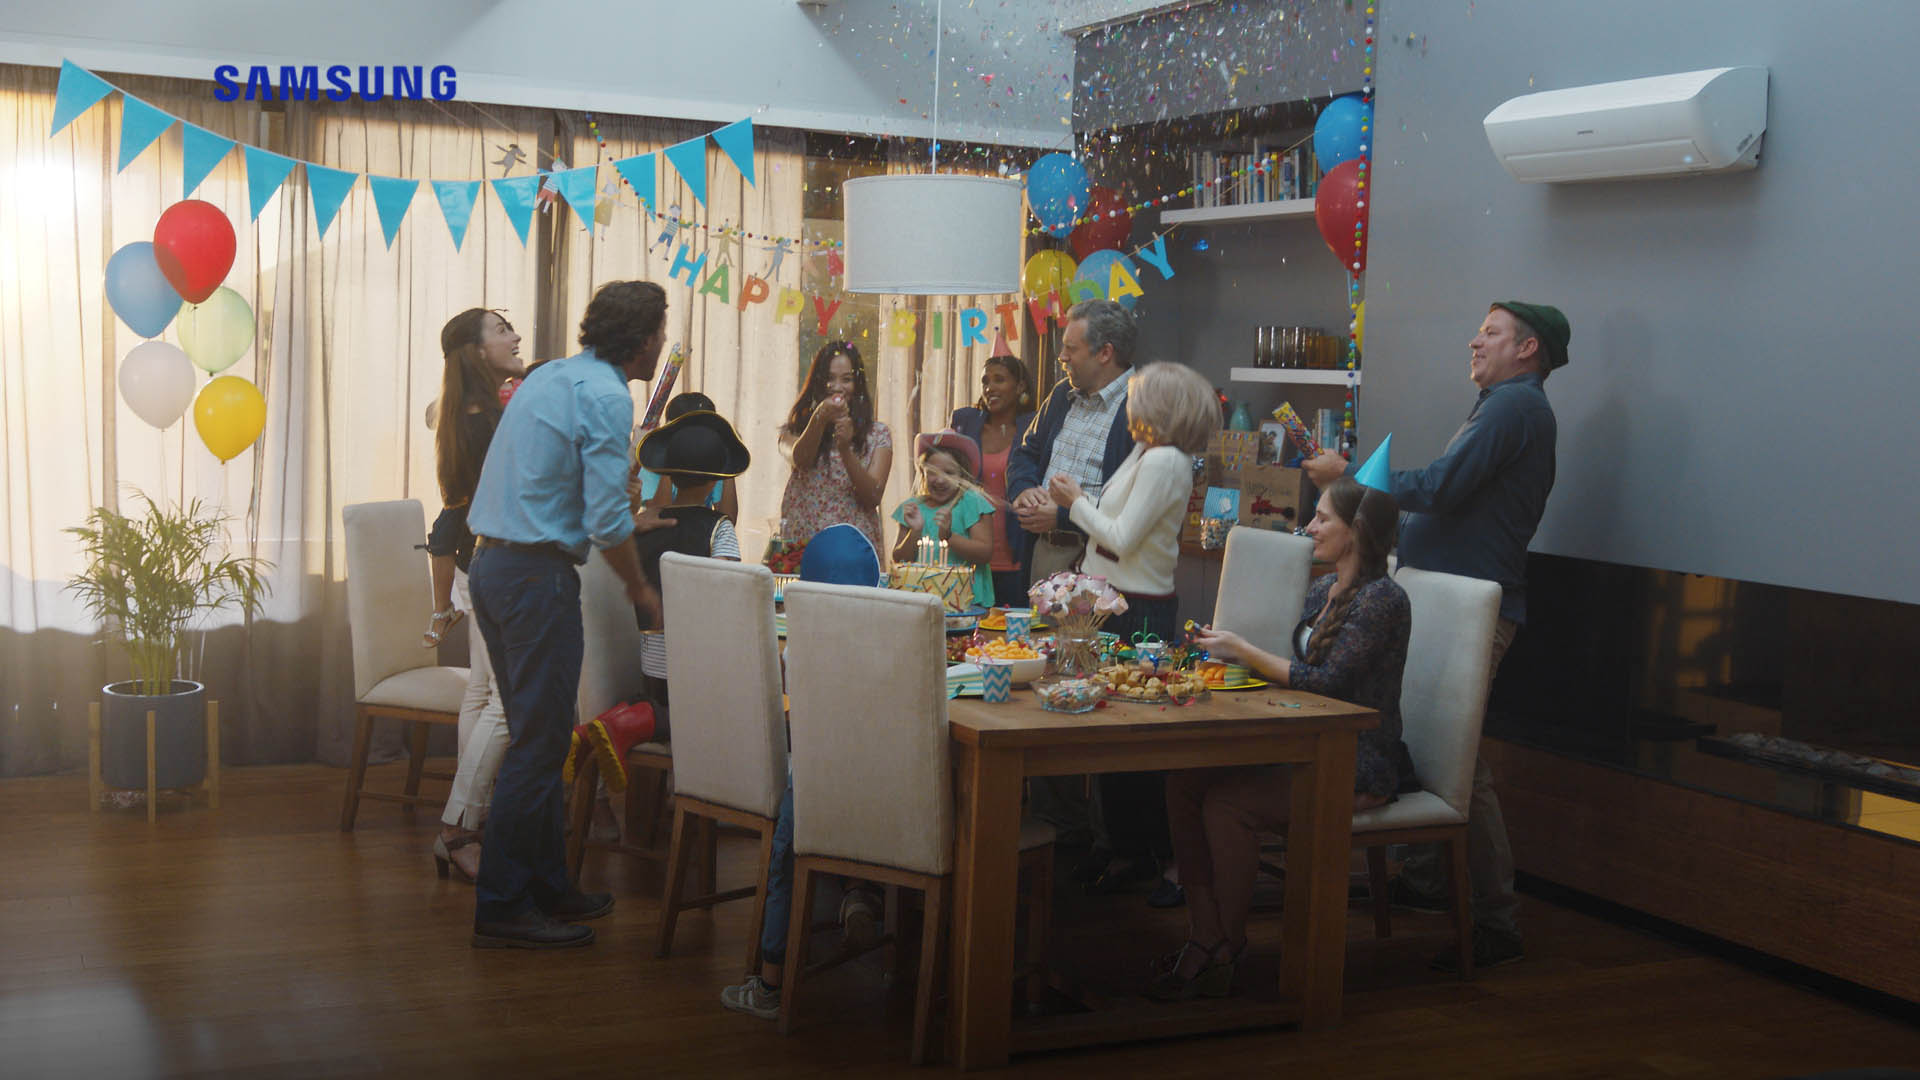 SAMSUNG Digital Appliances enables families to create meaningful moments at home